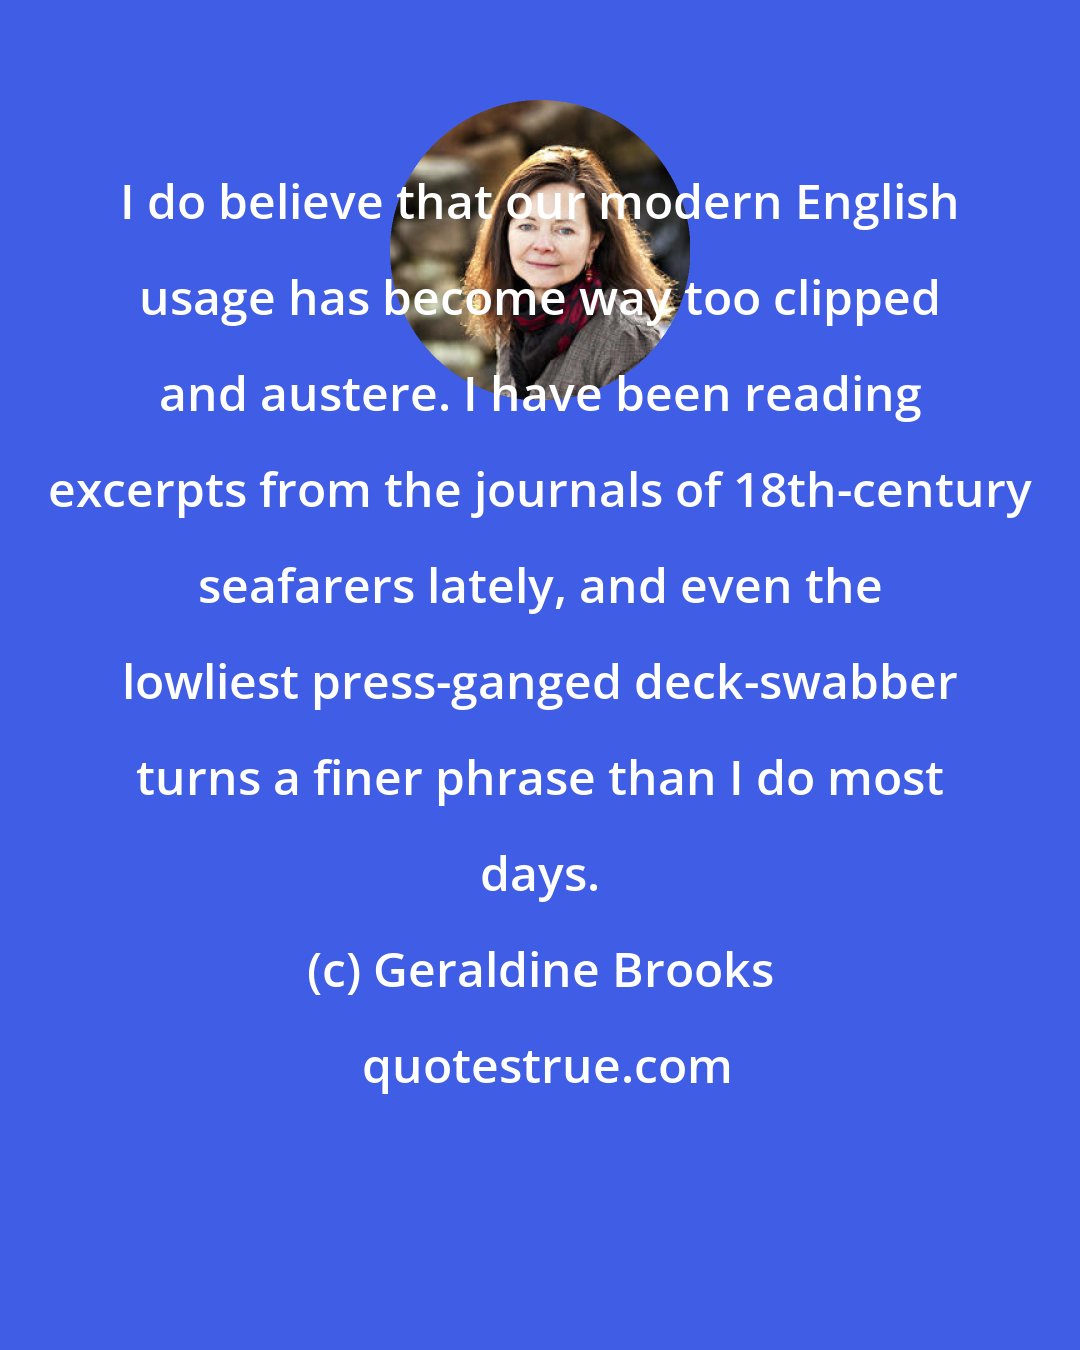 Geraldine Brooks: I do believe that our modern English usage has become way too clipped and austere. I have been reading excerpts from the journals of 18th-century seafarers lately, and even the lowliest press-ganged deck-swabber turns a finer phrase than I do most days.